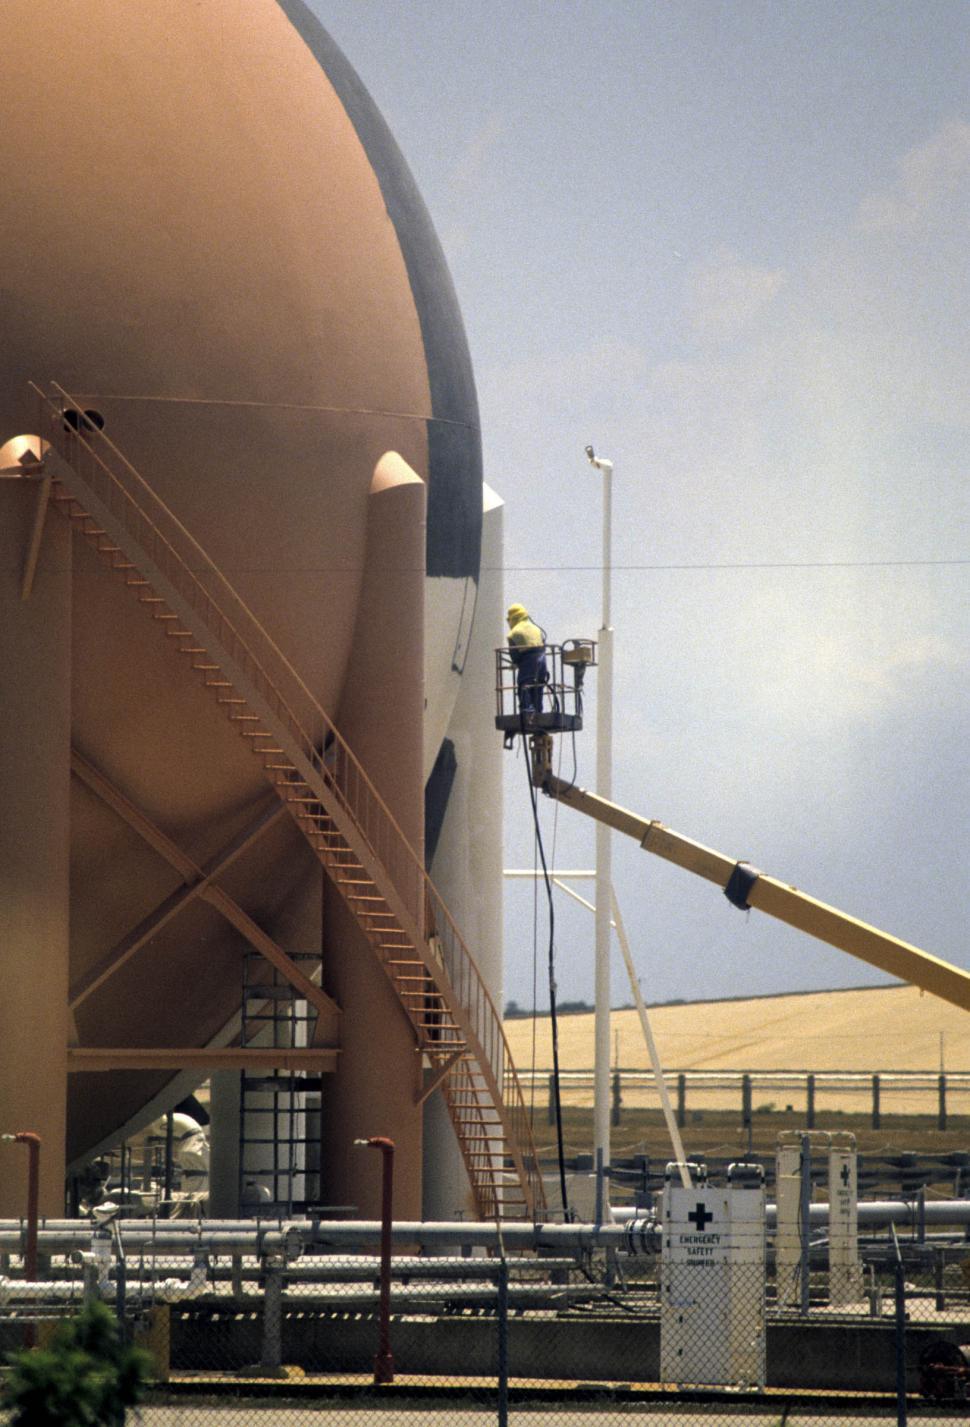 Free Image of Painting Storage Tank at Factory 